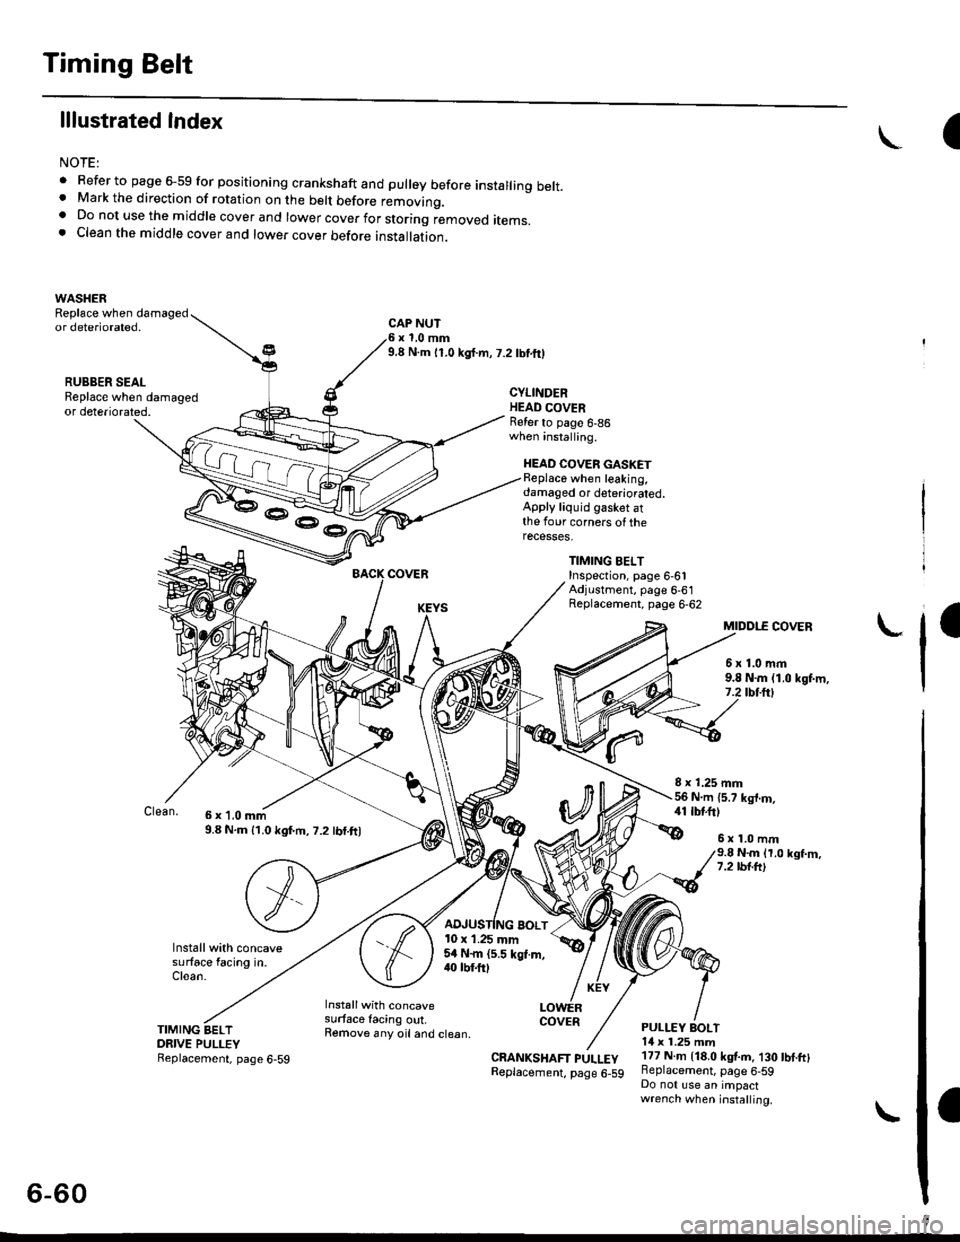 HONDA CIVIC 1998 6.G Workshop Manual Timing Belt
lllustrated Index
NOTE:
. Refer to page 6-59 for positioning crankshaft and pulley before installing belt.. Mark the direction of rotation on the belt before removino.a Do not use the midd